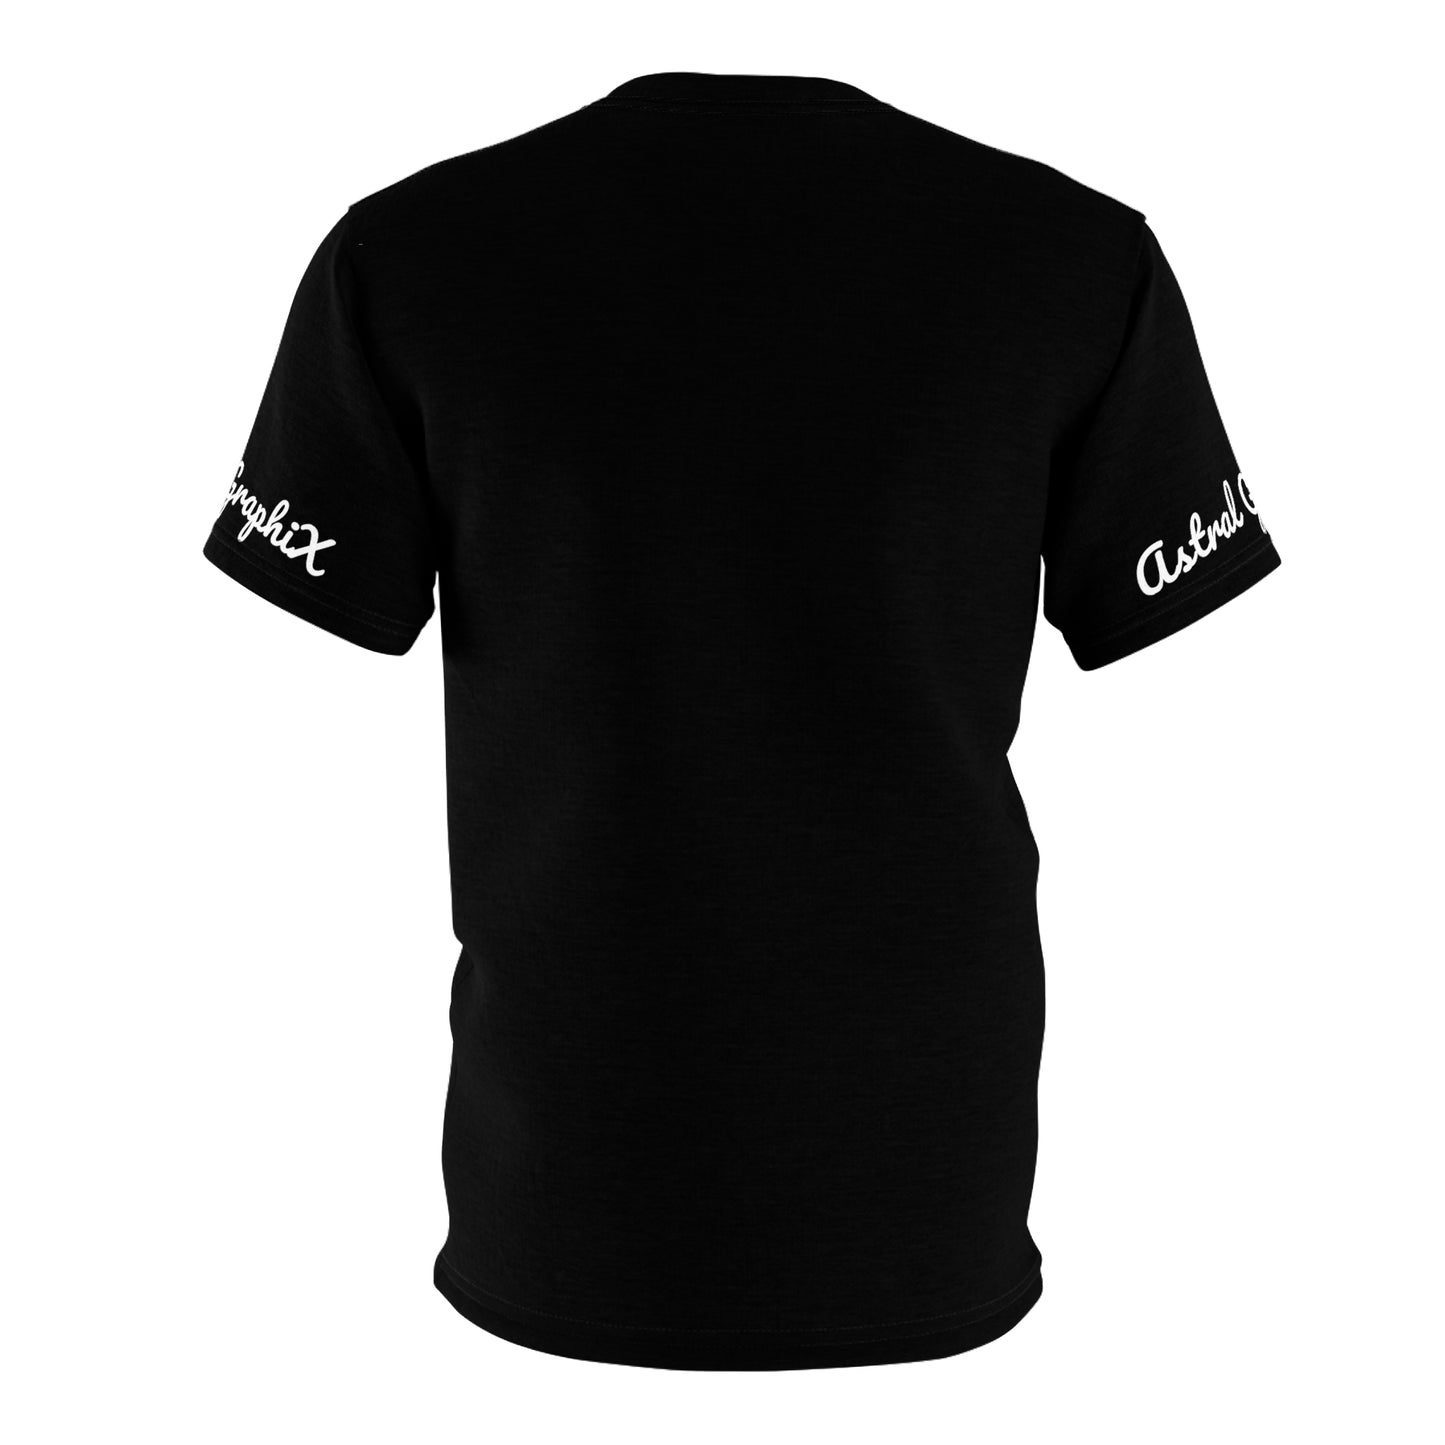 Word Art Collection - Unisex AOP Cut & Sew Tee - Keep Life Simple in Black